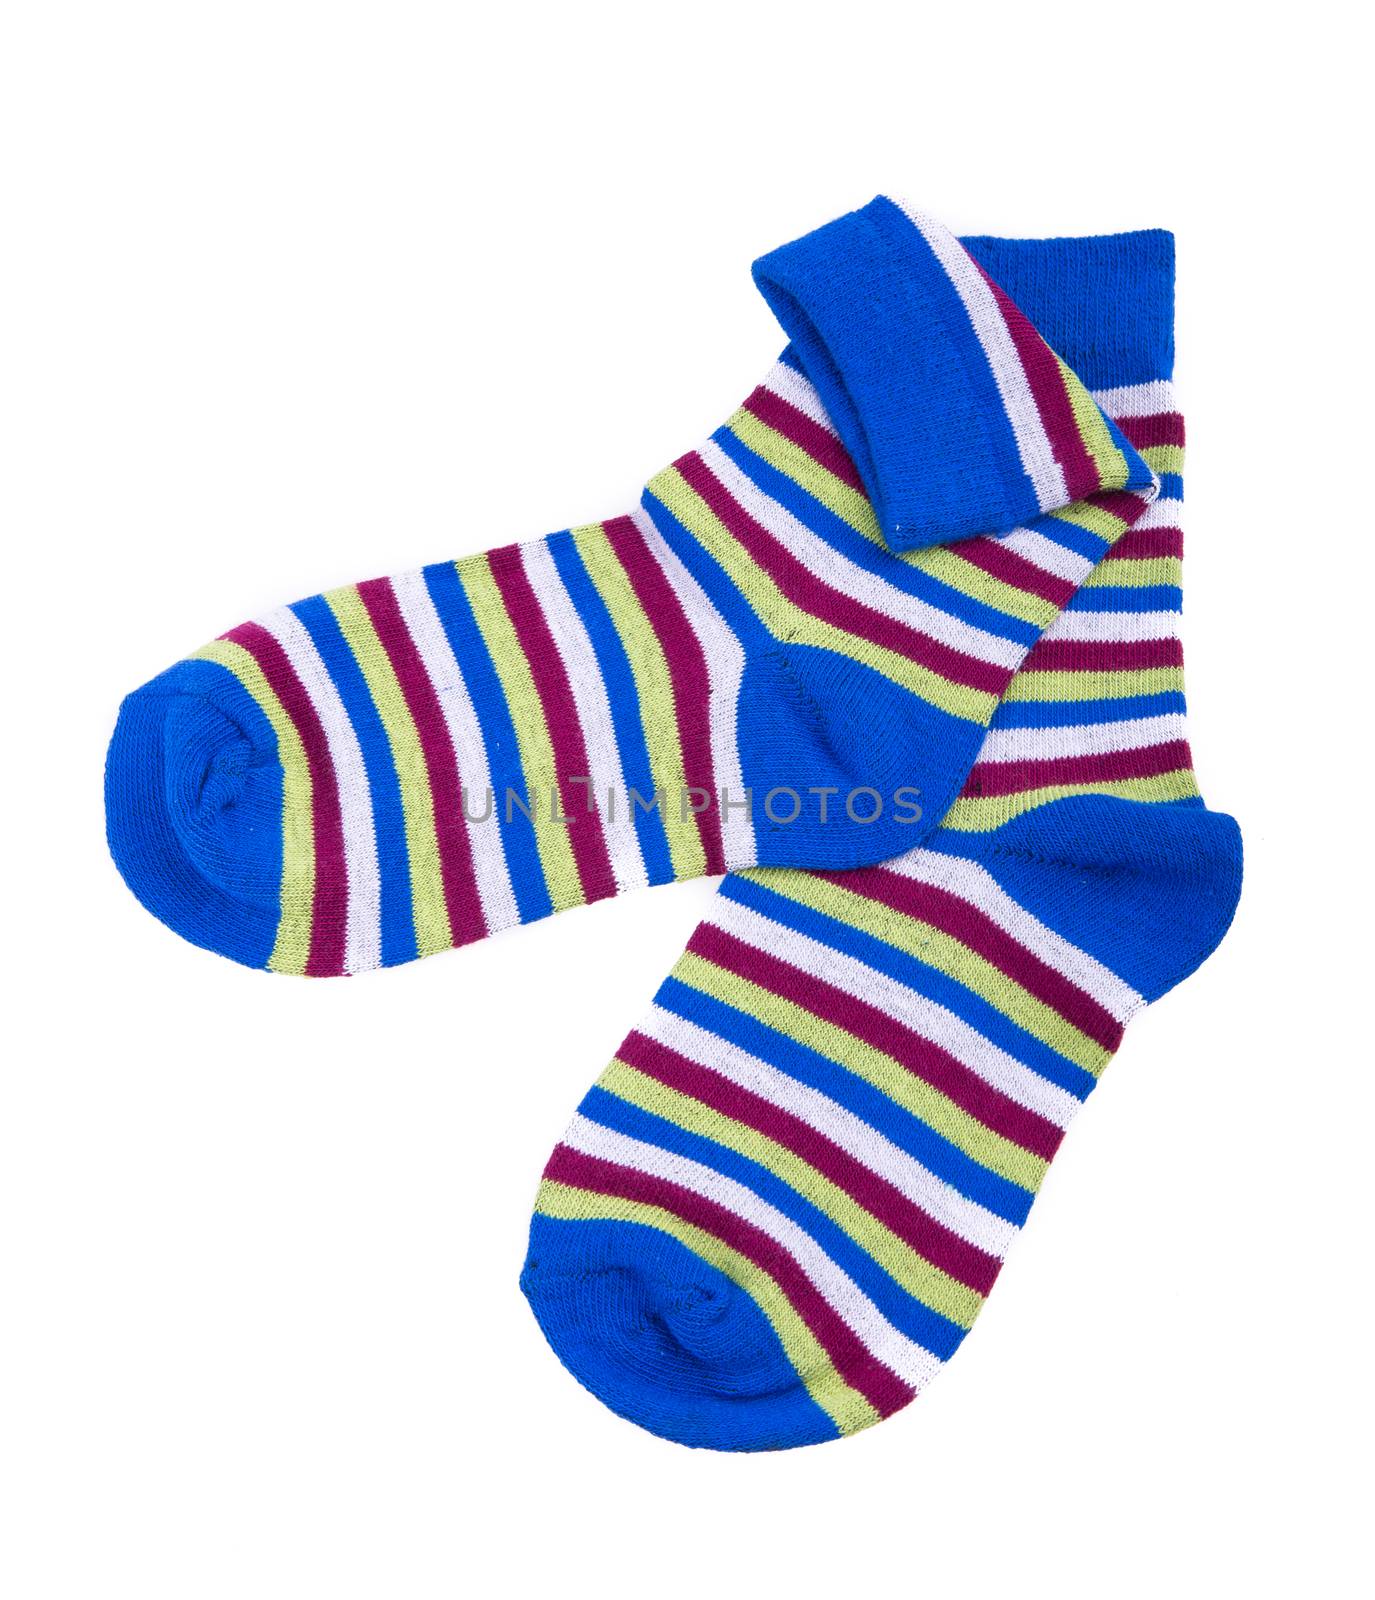 Multicolor child's striped socks by tehcheesiong